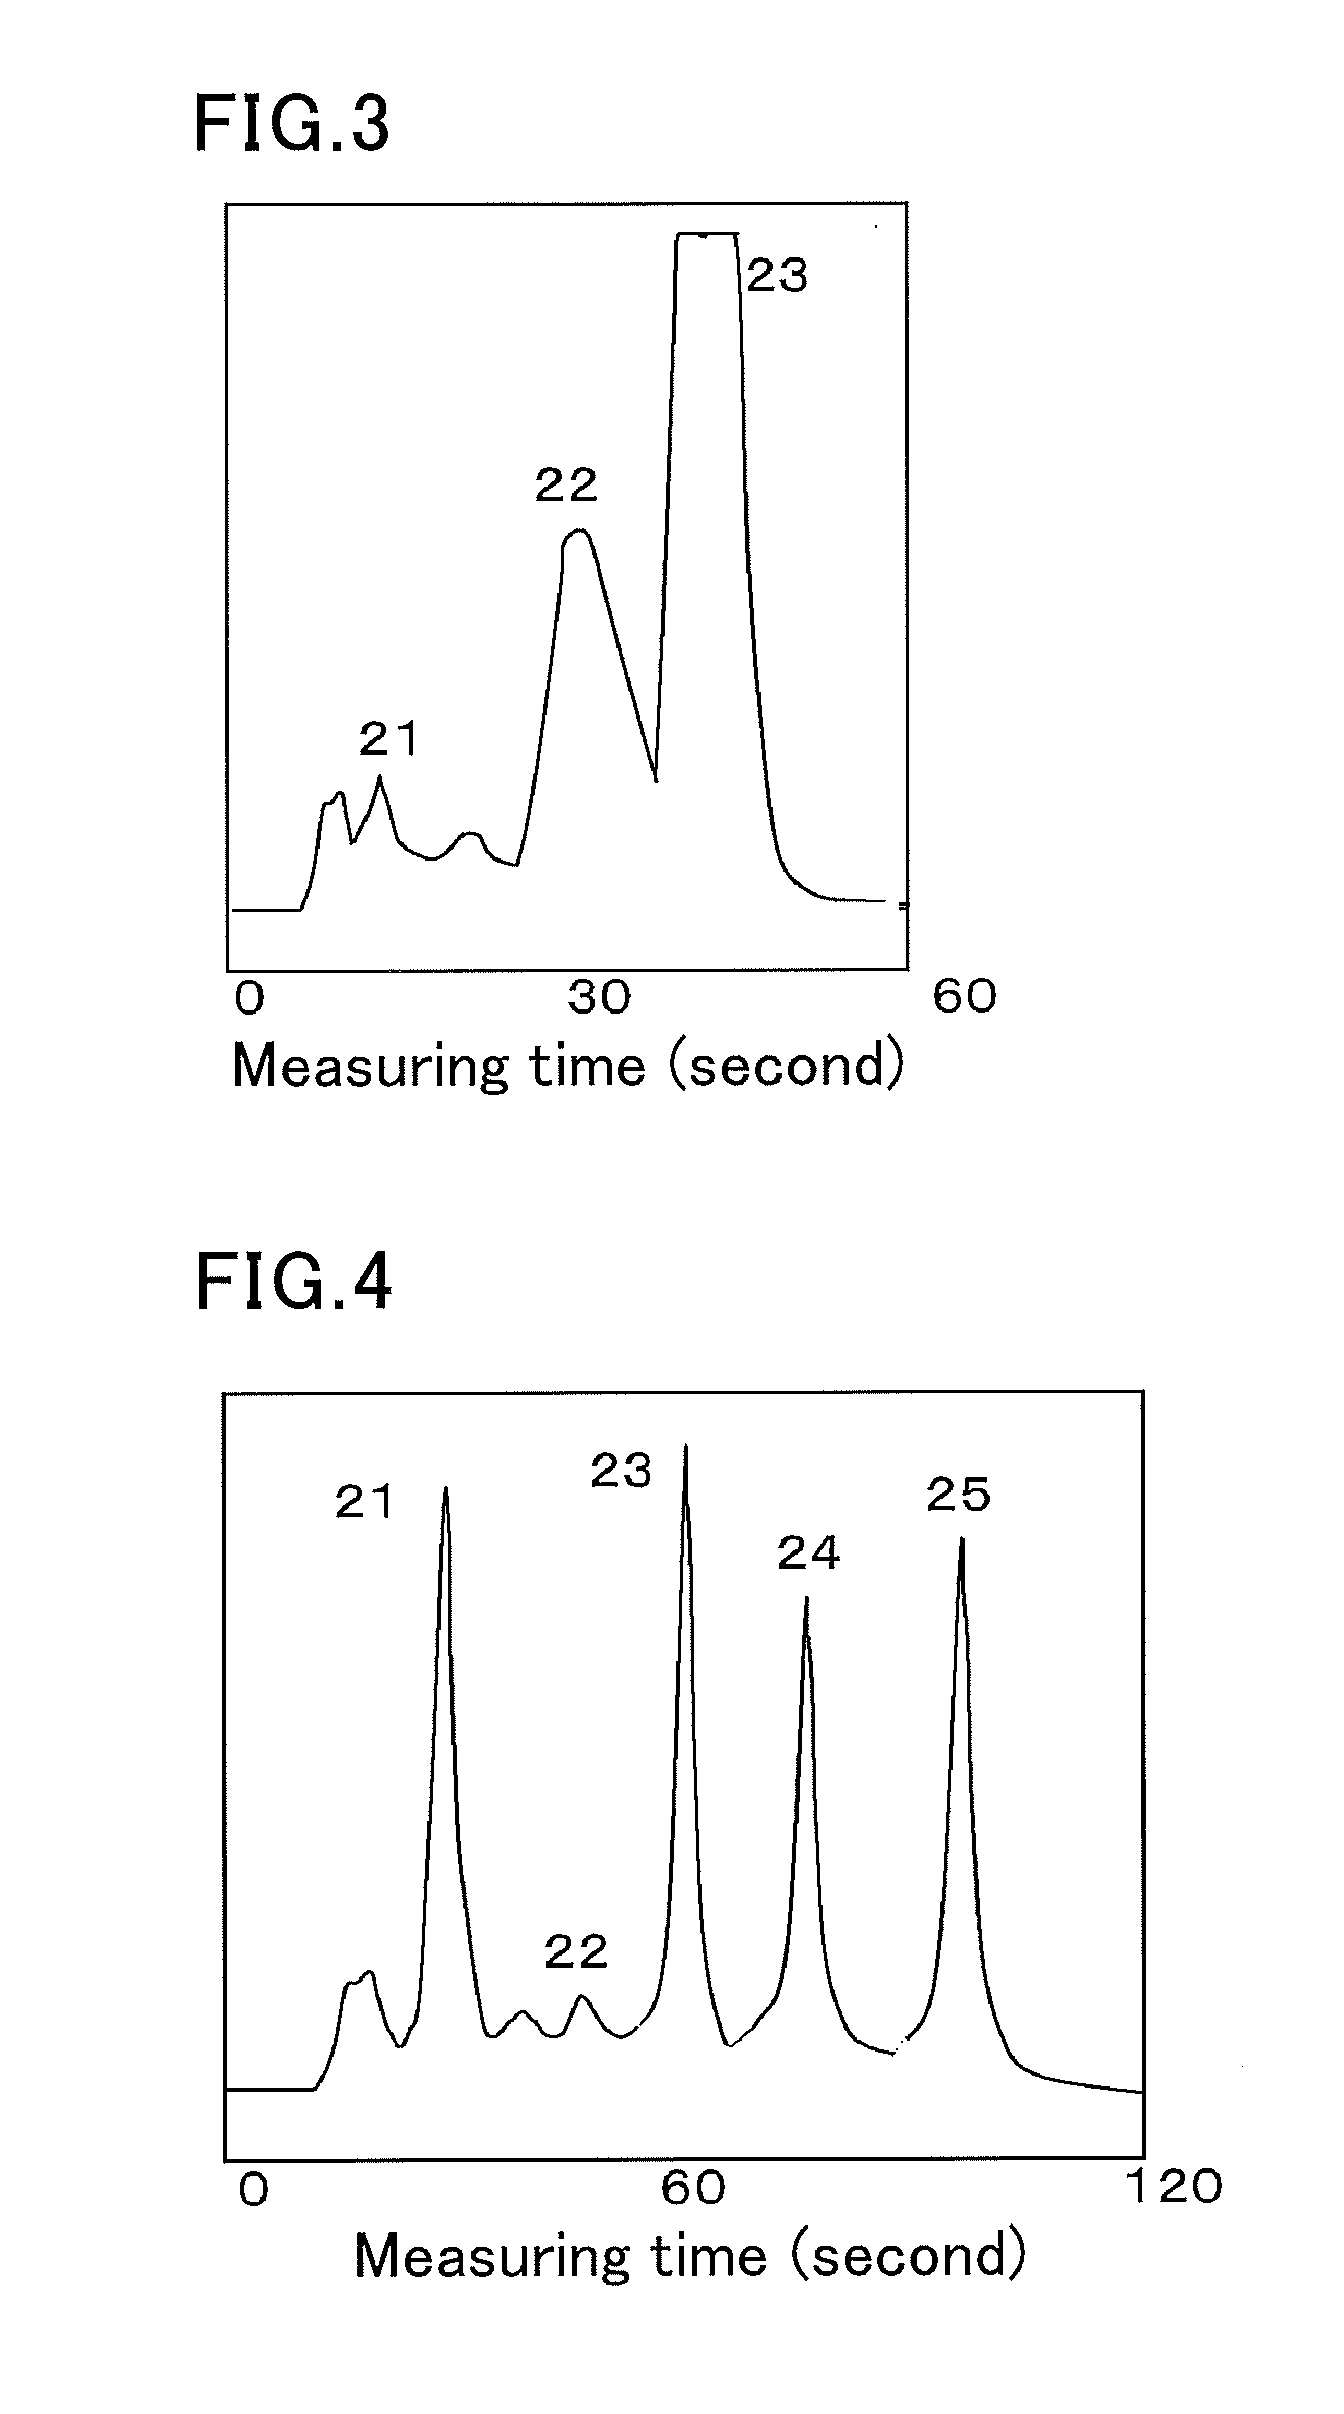 METHOD FOR MEASURING STABLE HEMOGLOBIN A1c USING LIQUID CHROMATOGRAPHY, AND METHOD FOR SIMULTANEOUS MEASUREMENT OF STABLE HEMOGLOBIN A1c AND ABNORMAL HEMOGLOBIN USING LIQUID CHROMATOGRAPHY